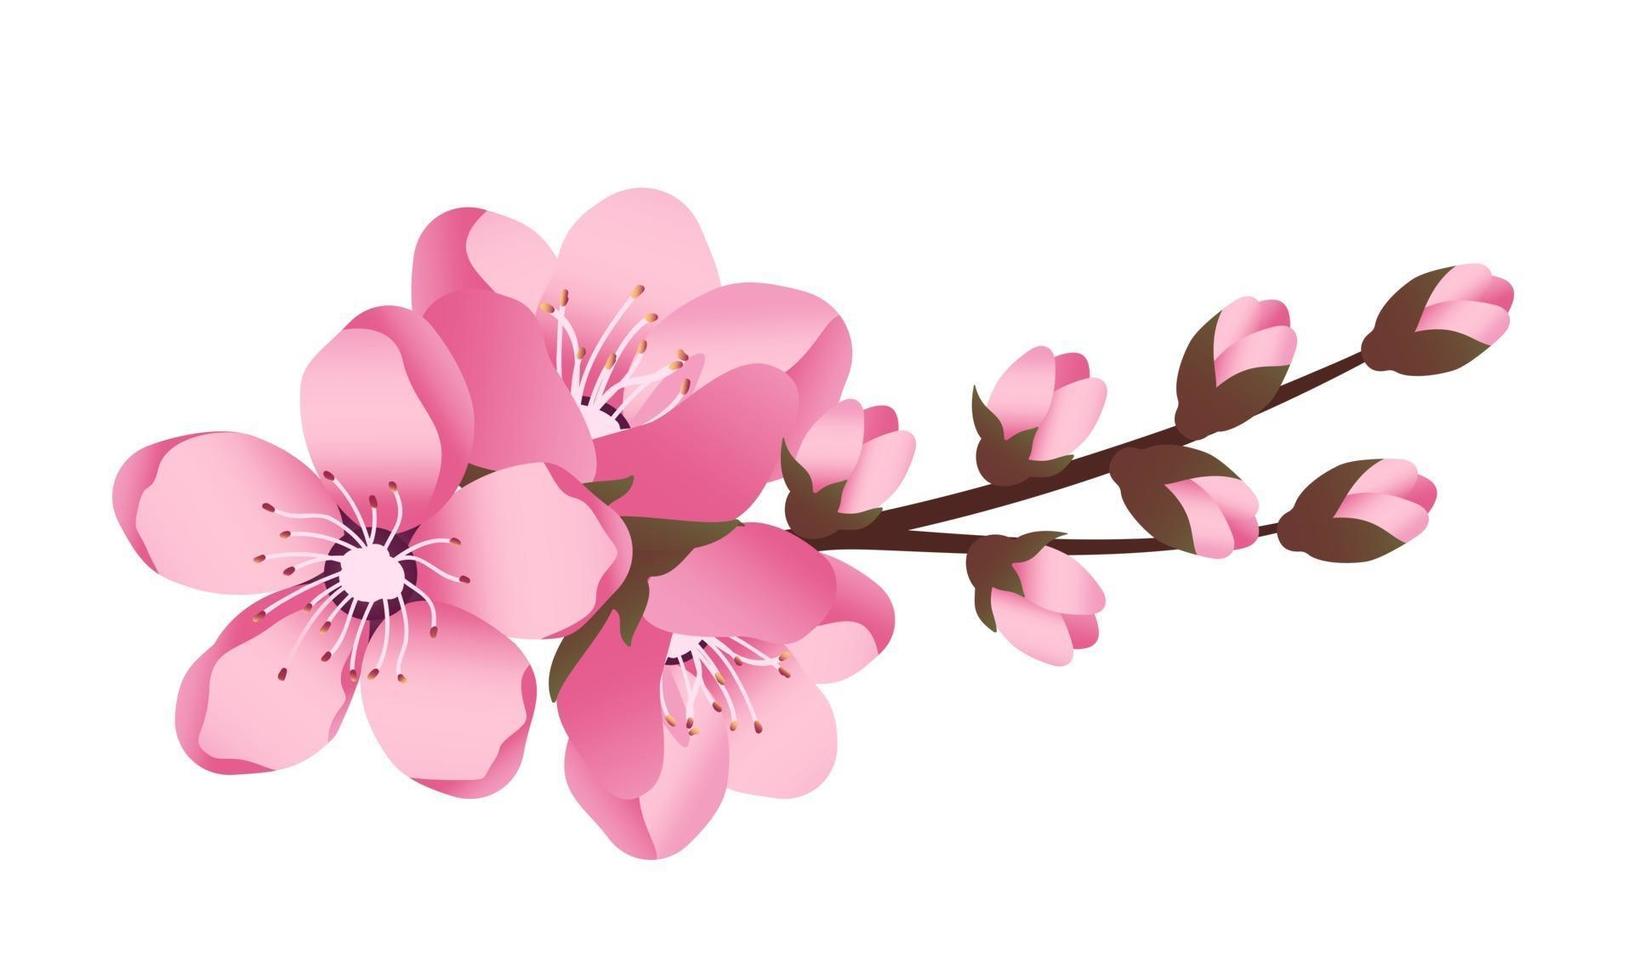 Cute Sakura flowers icon set. The cherry branches have bloomed. vector